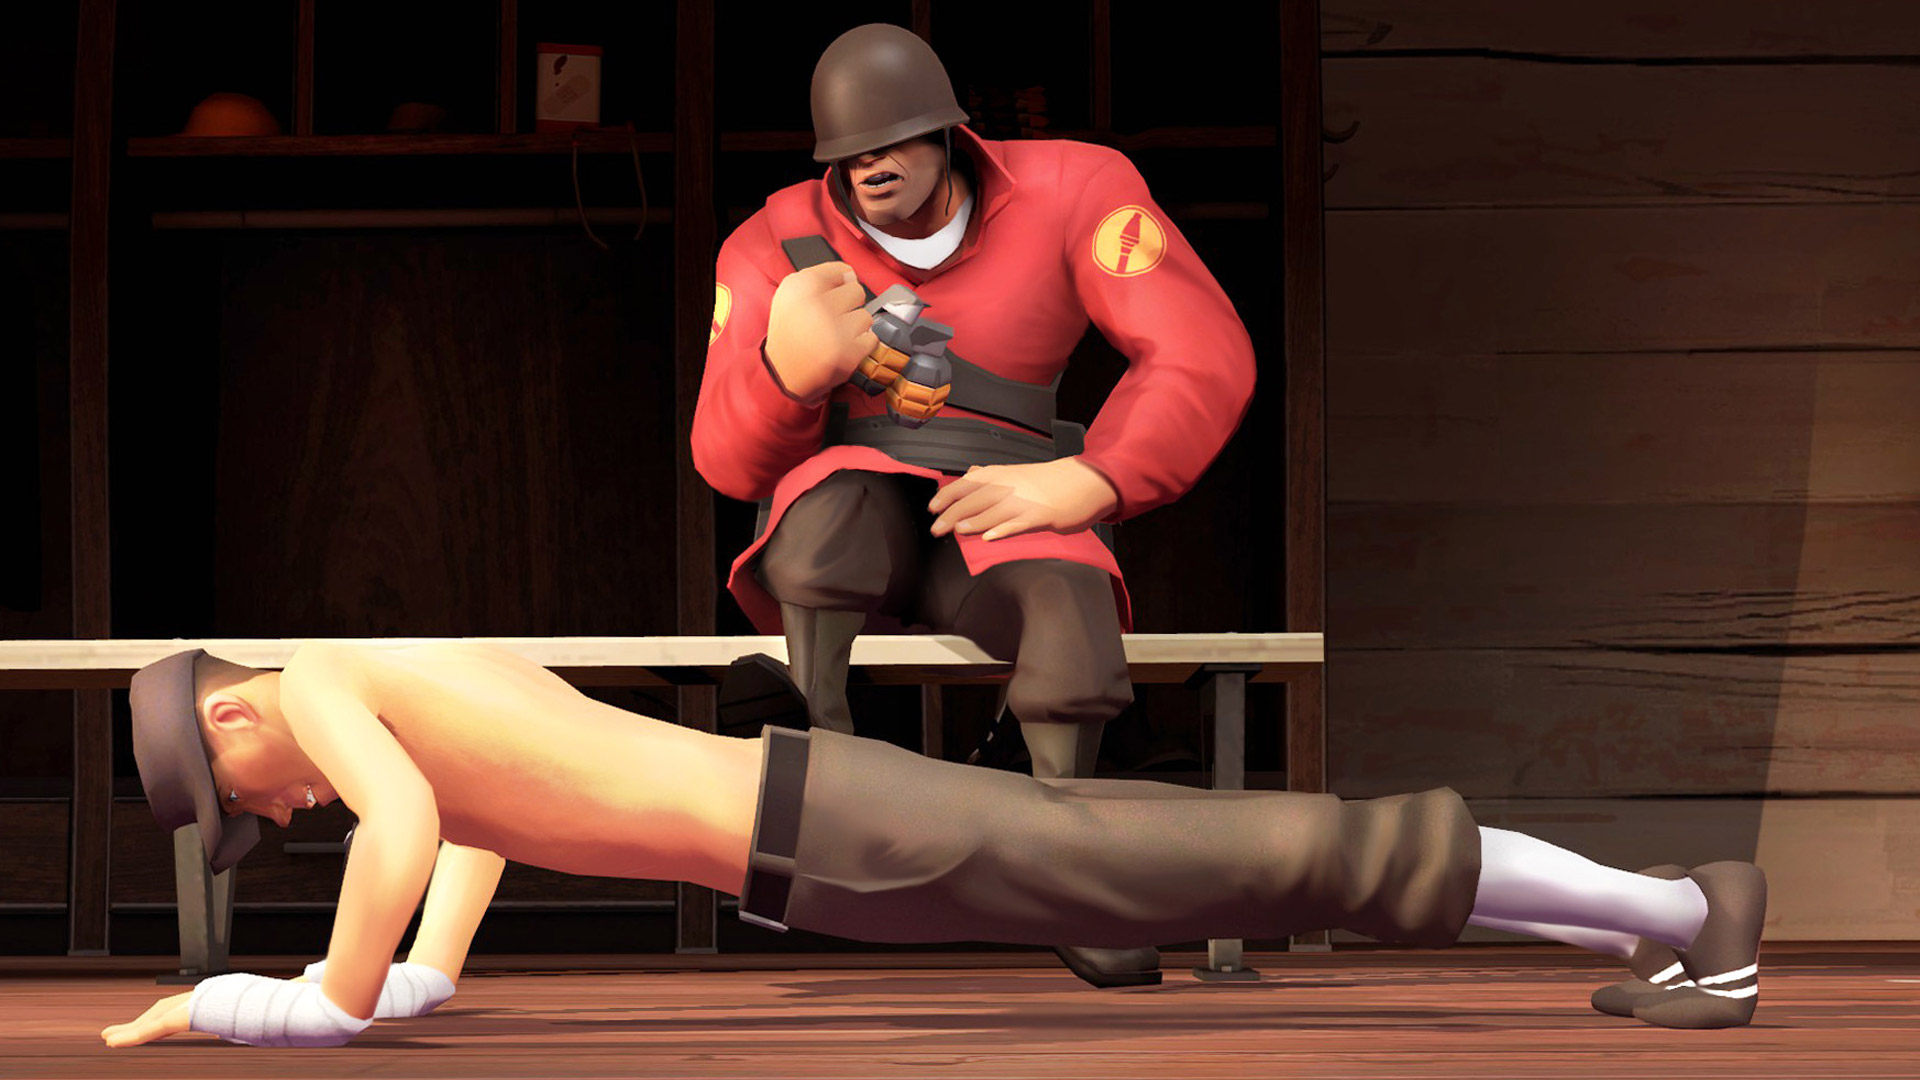 Team Fortress Wallpaper In